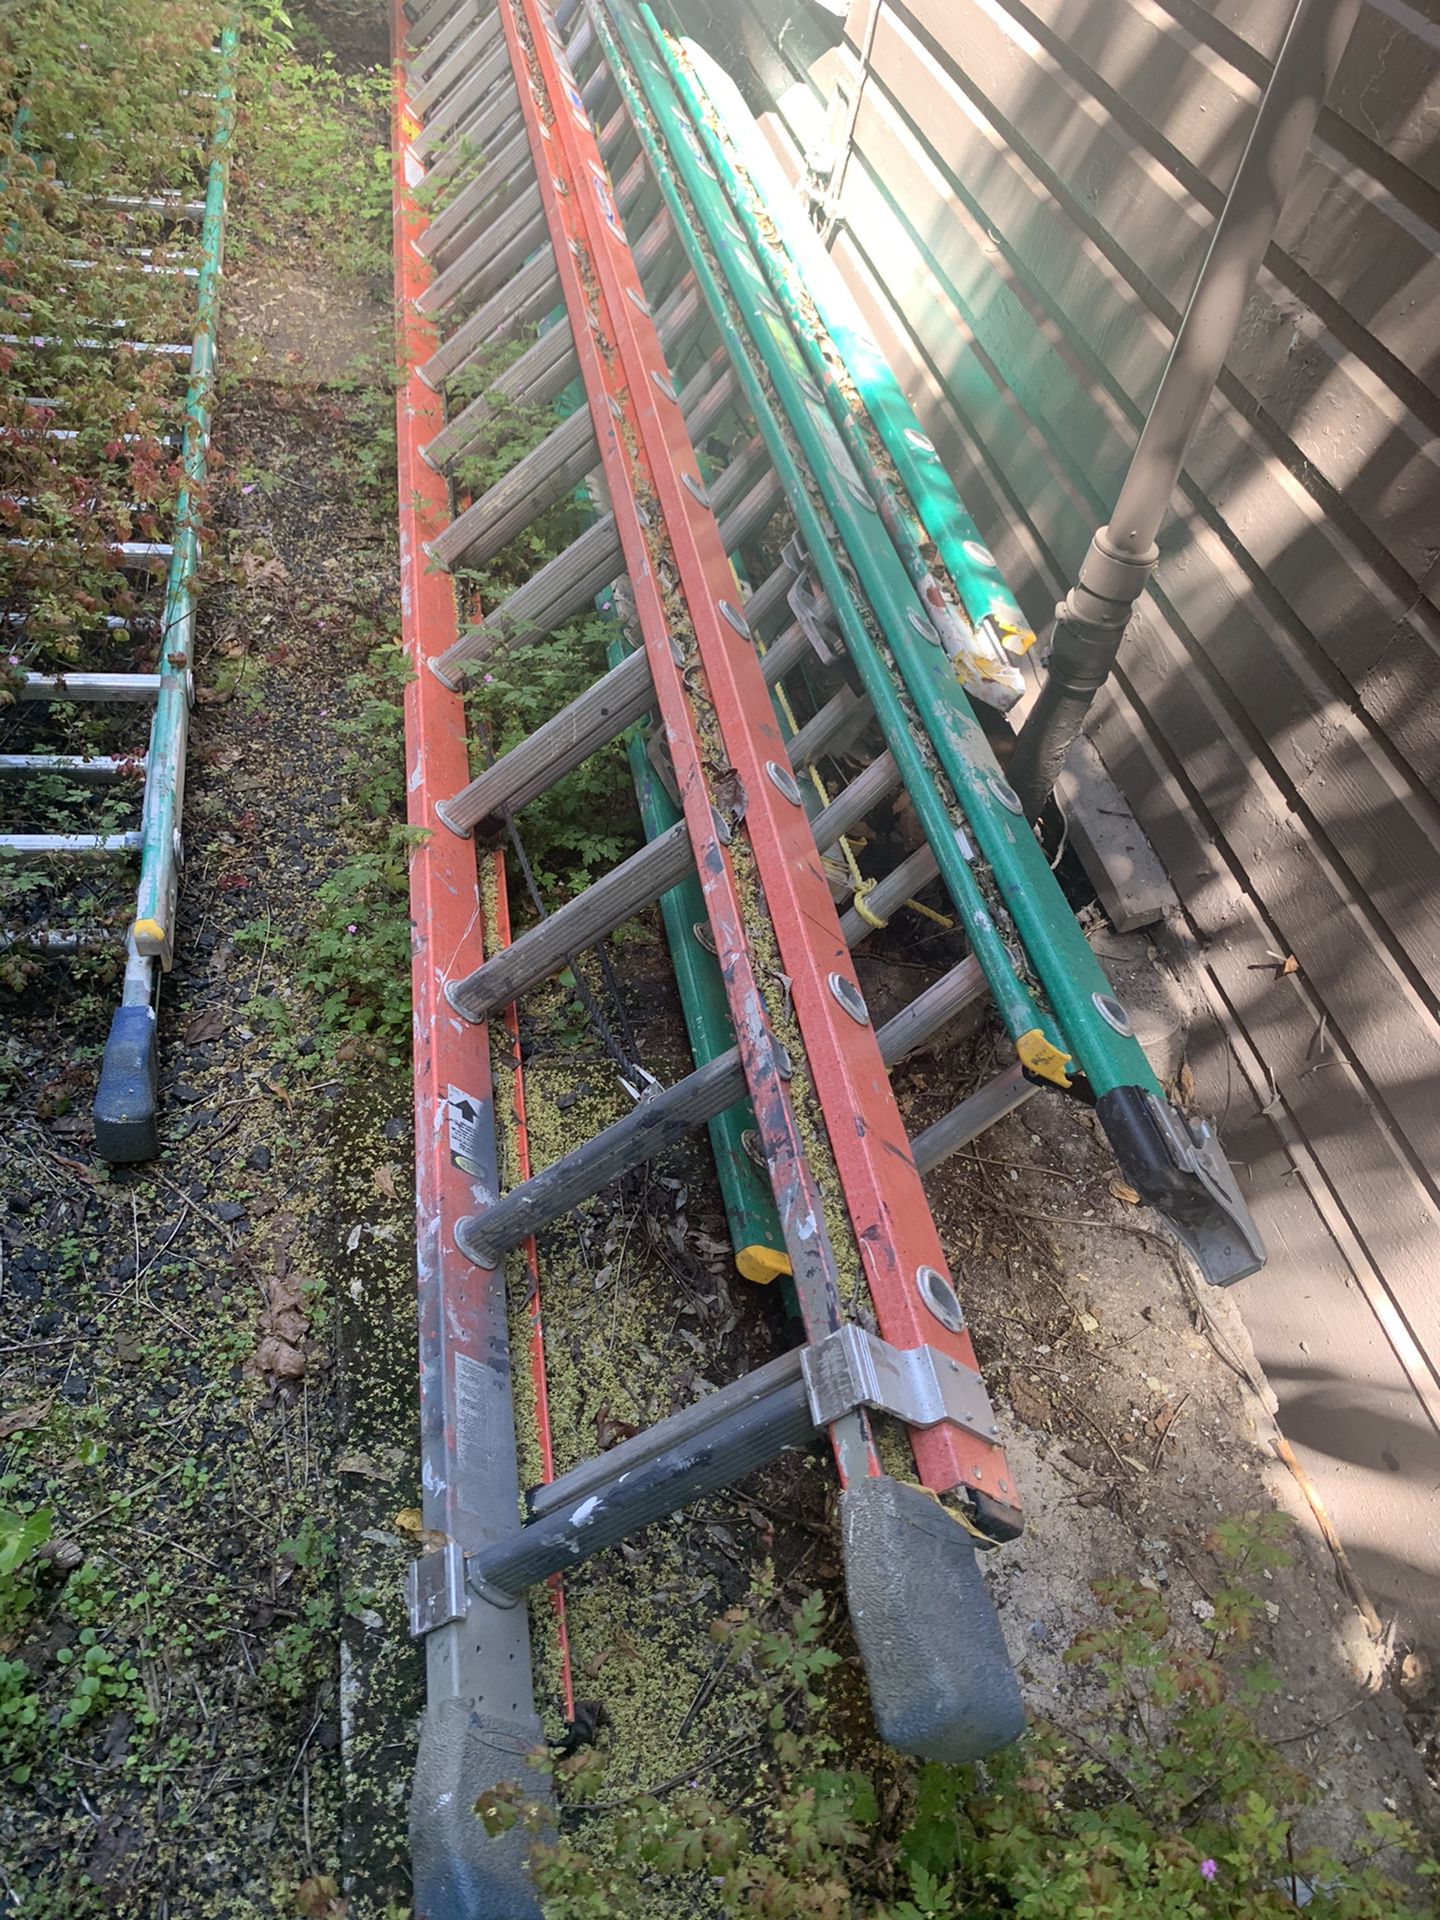 Extension ladders